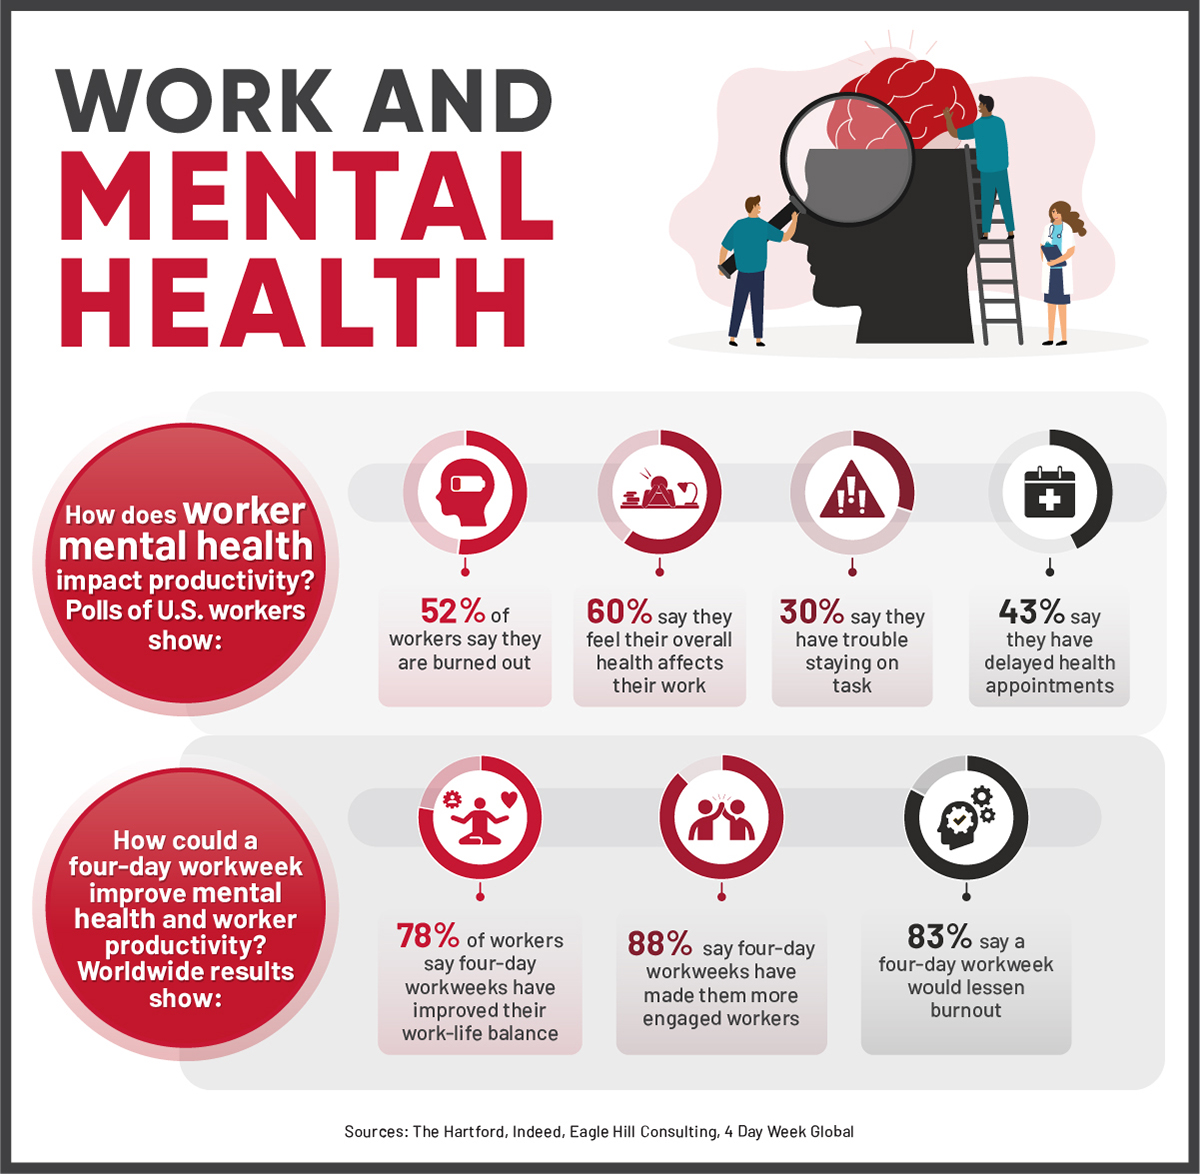 Statistics on workers’ mental health and how a four-day workweek could help.